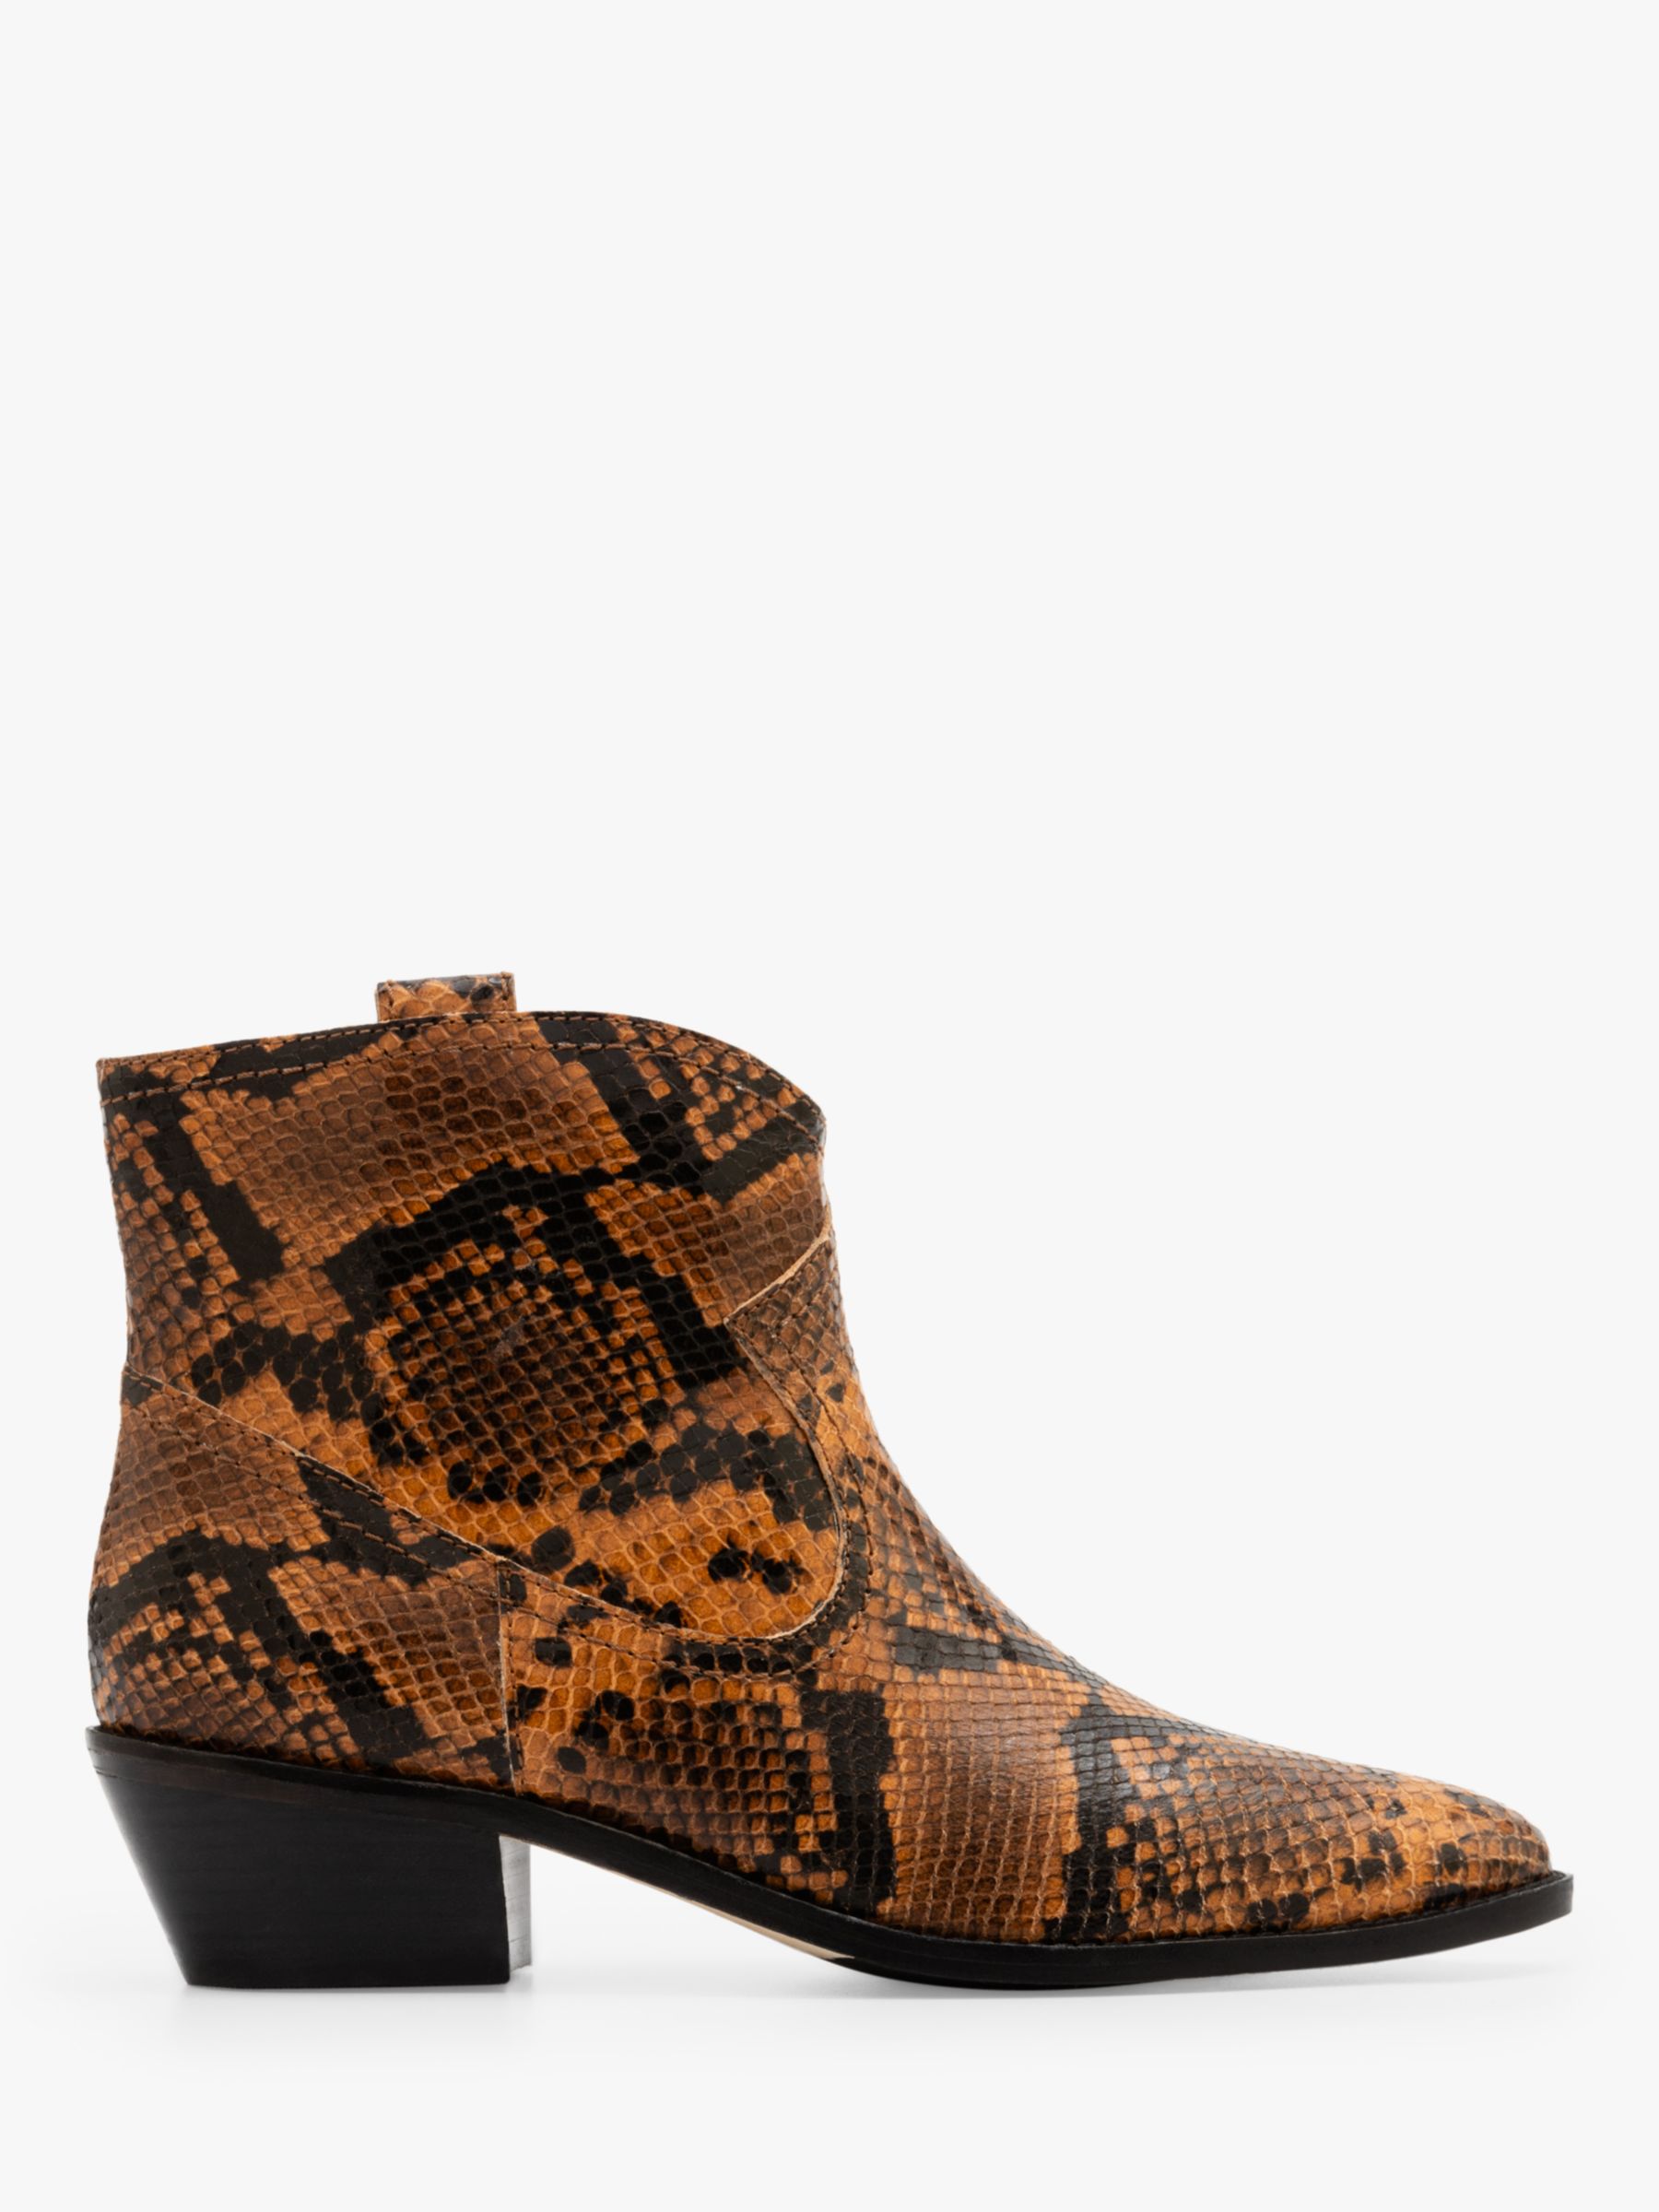 Boden Allendale Leather Snake Print Ankle Boots, Camel